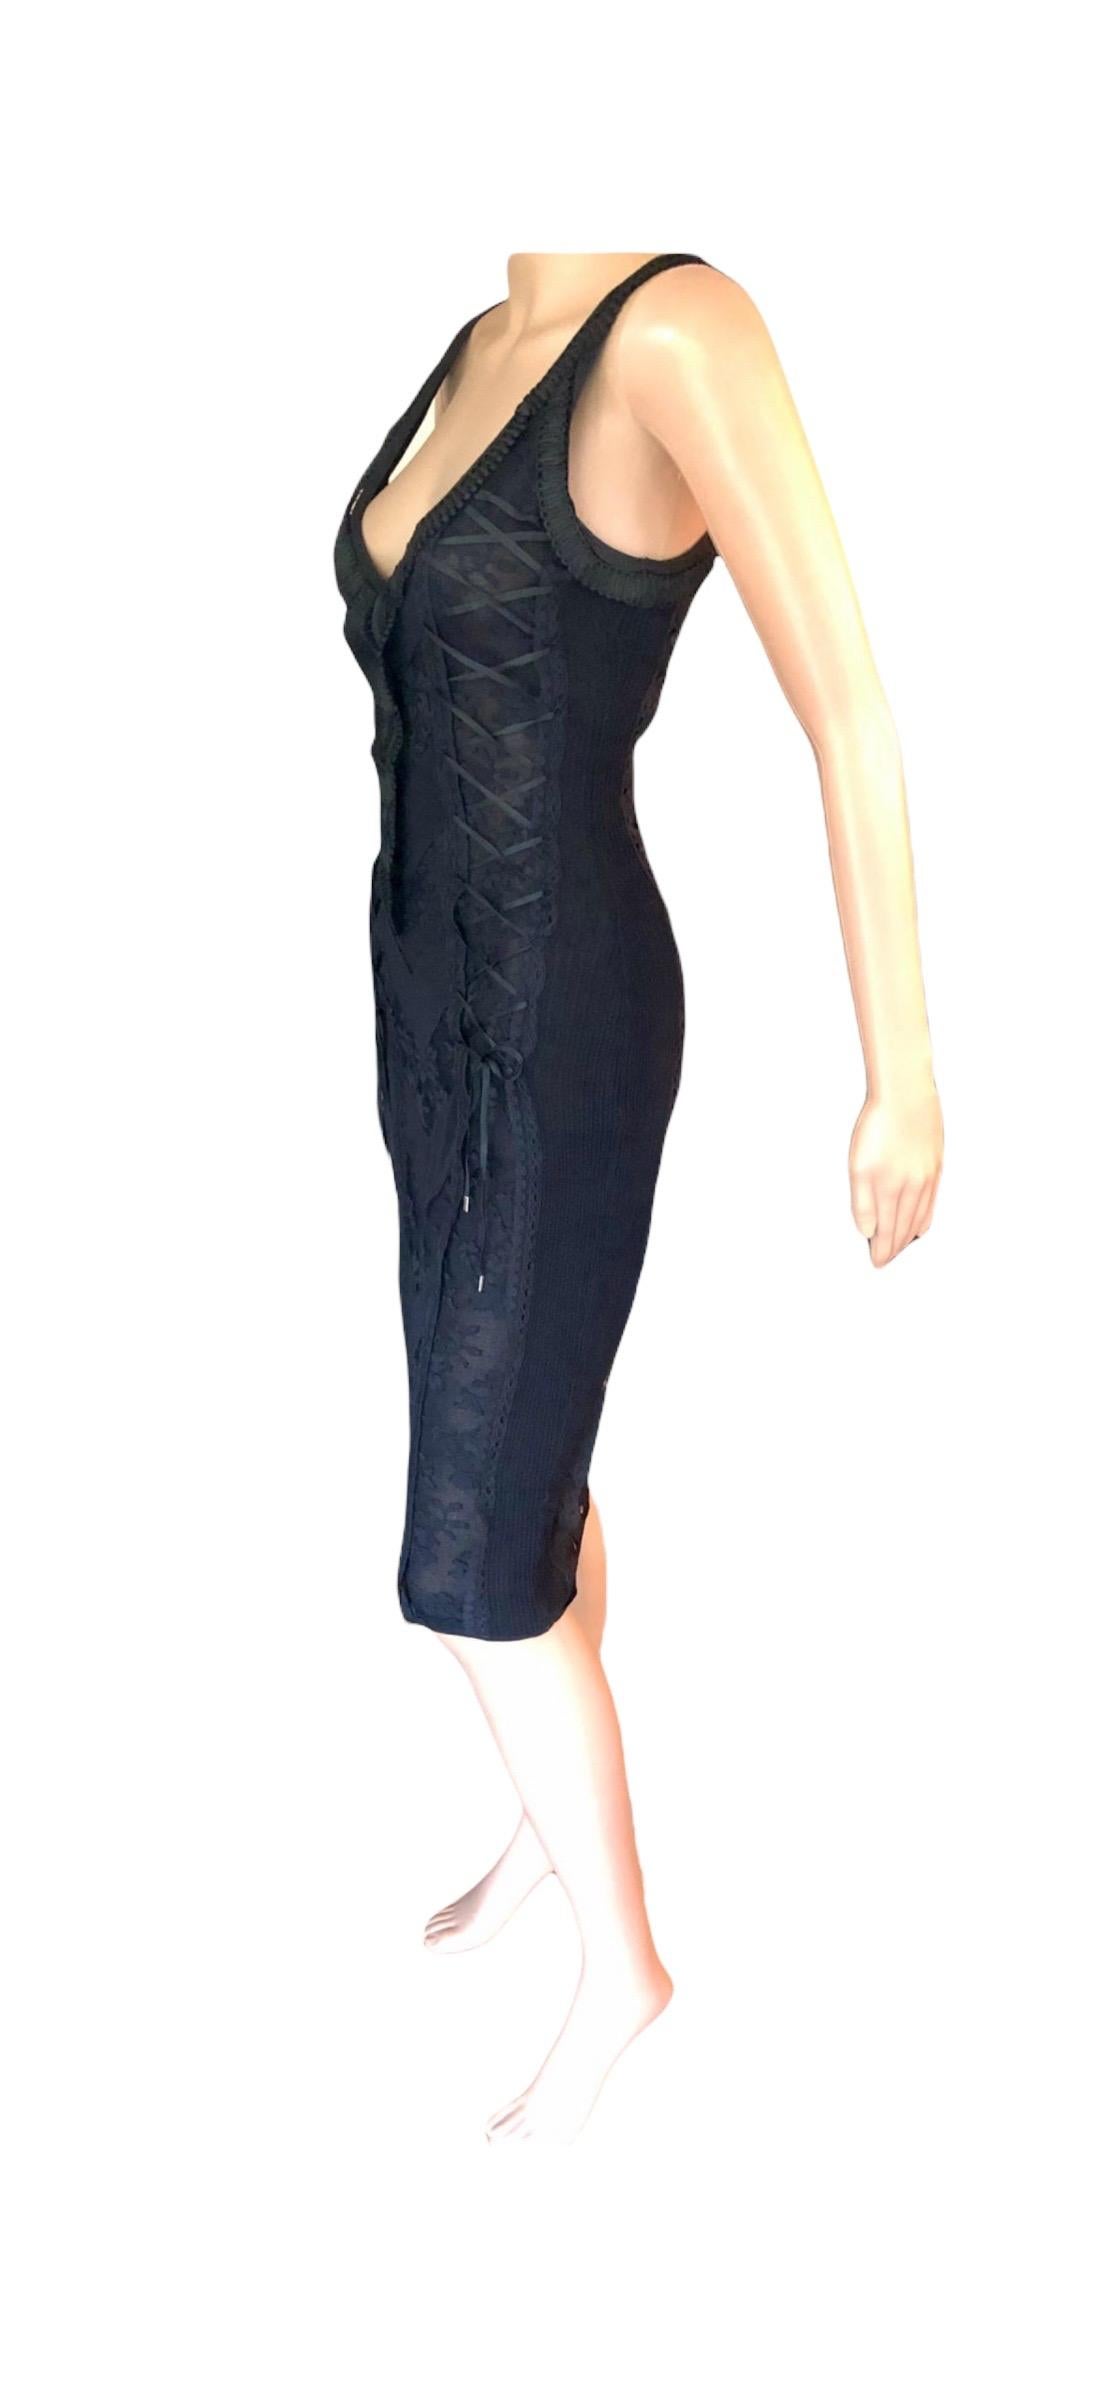 Christian Dior by John Galliano S/S 2006 Sheer Lace Trimmed Corset Knit Dress For Sale 8